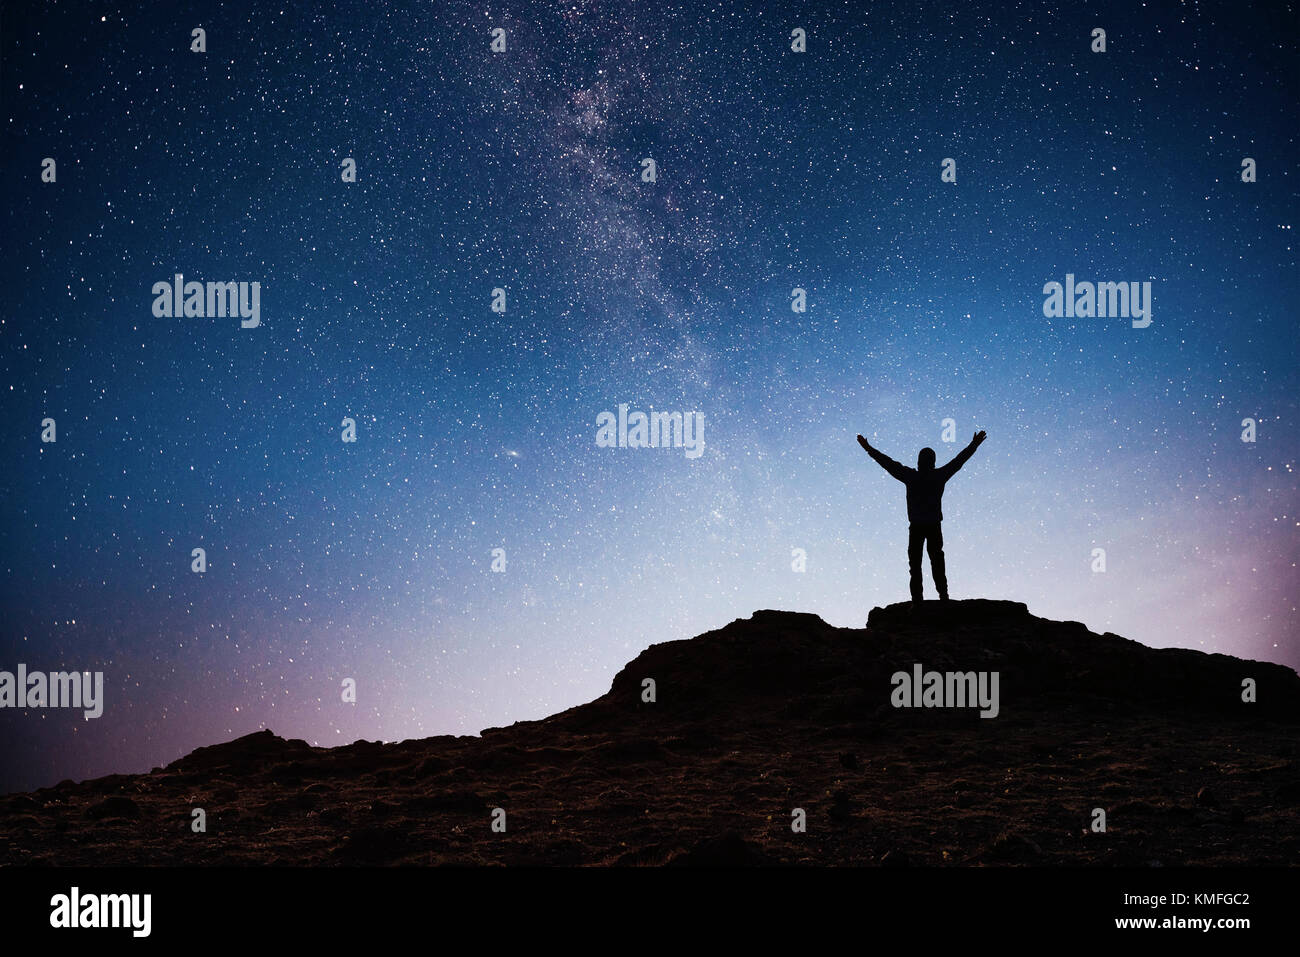 Silhouette young man background of the Milky Way galaxy on a bright star dark sky tone. Stock Photo